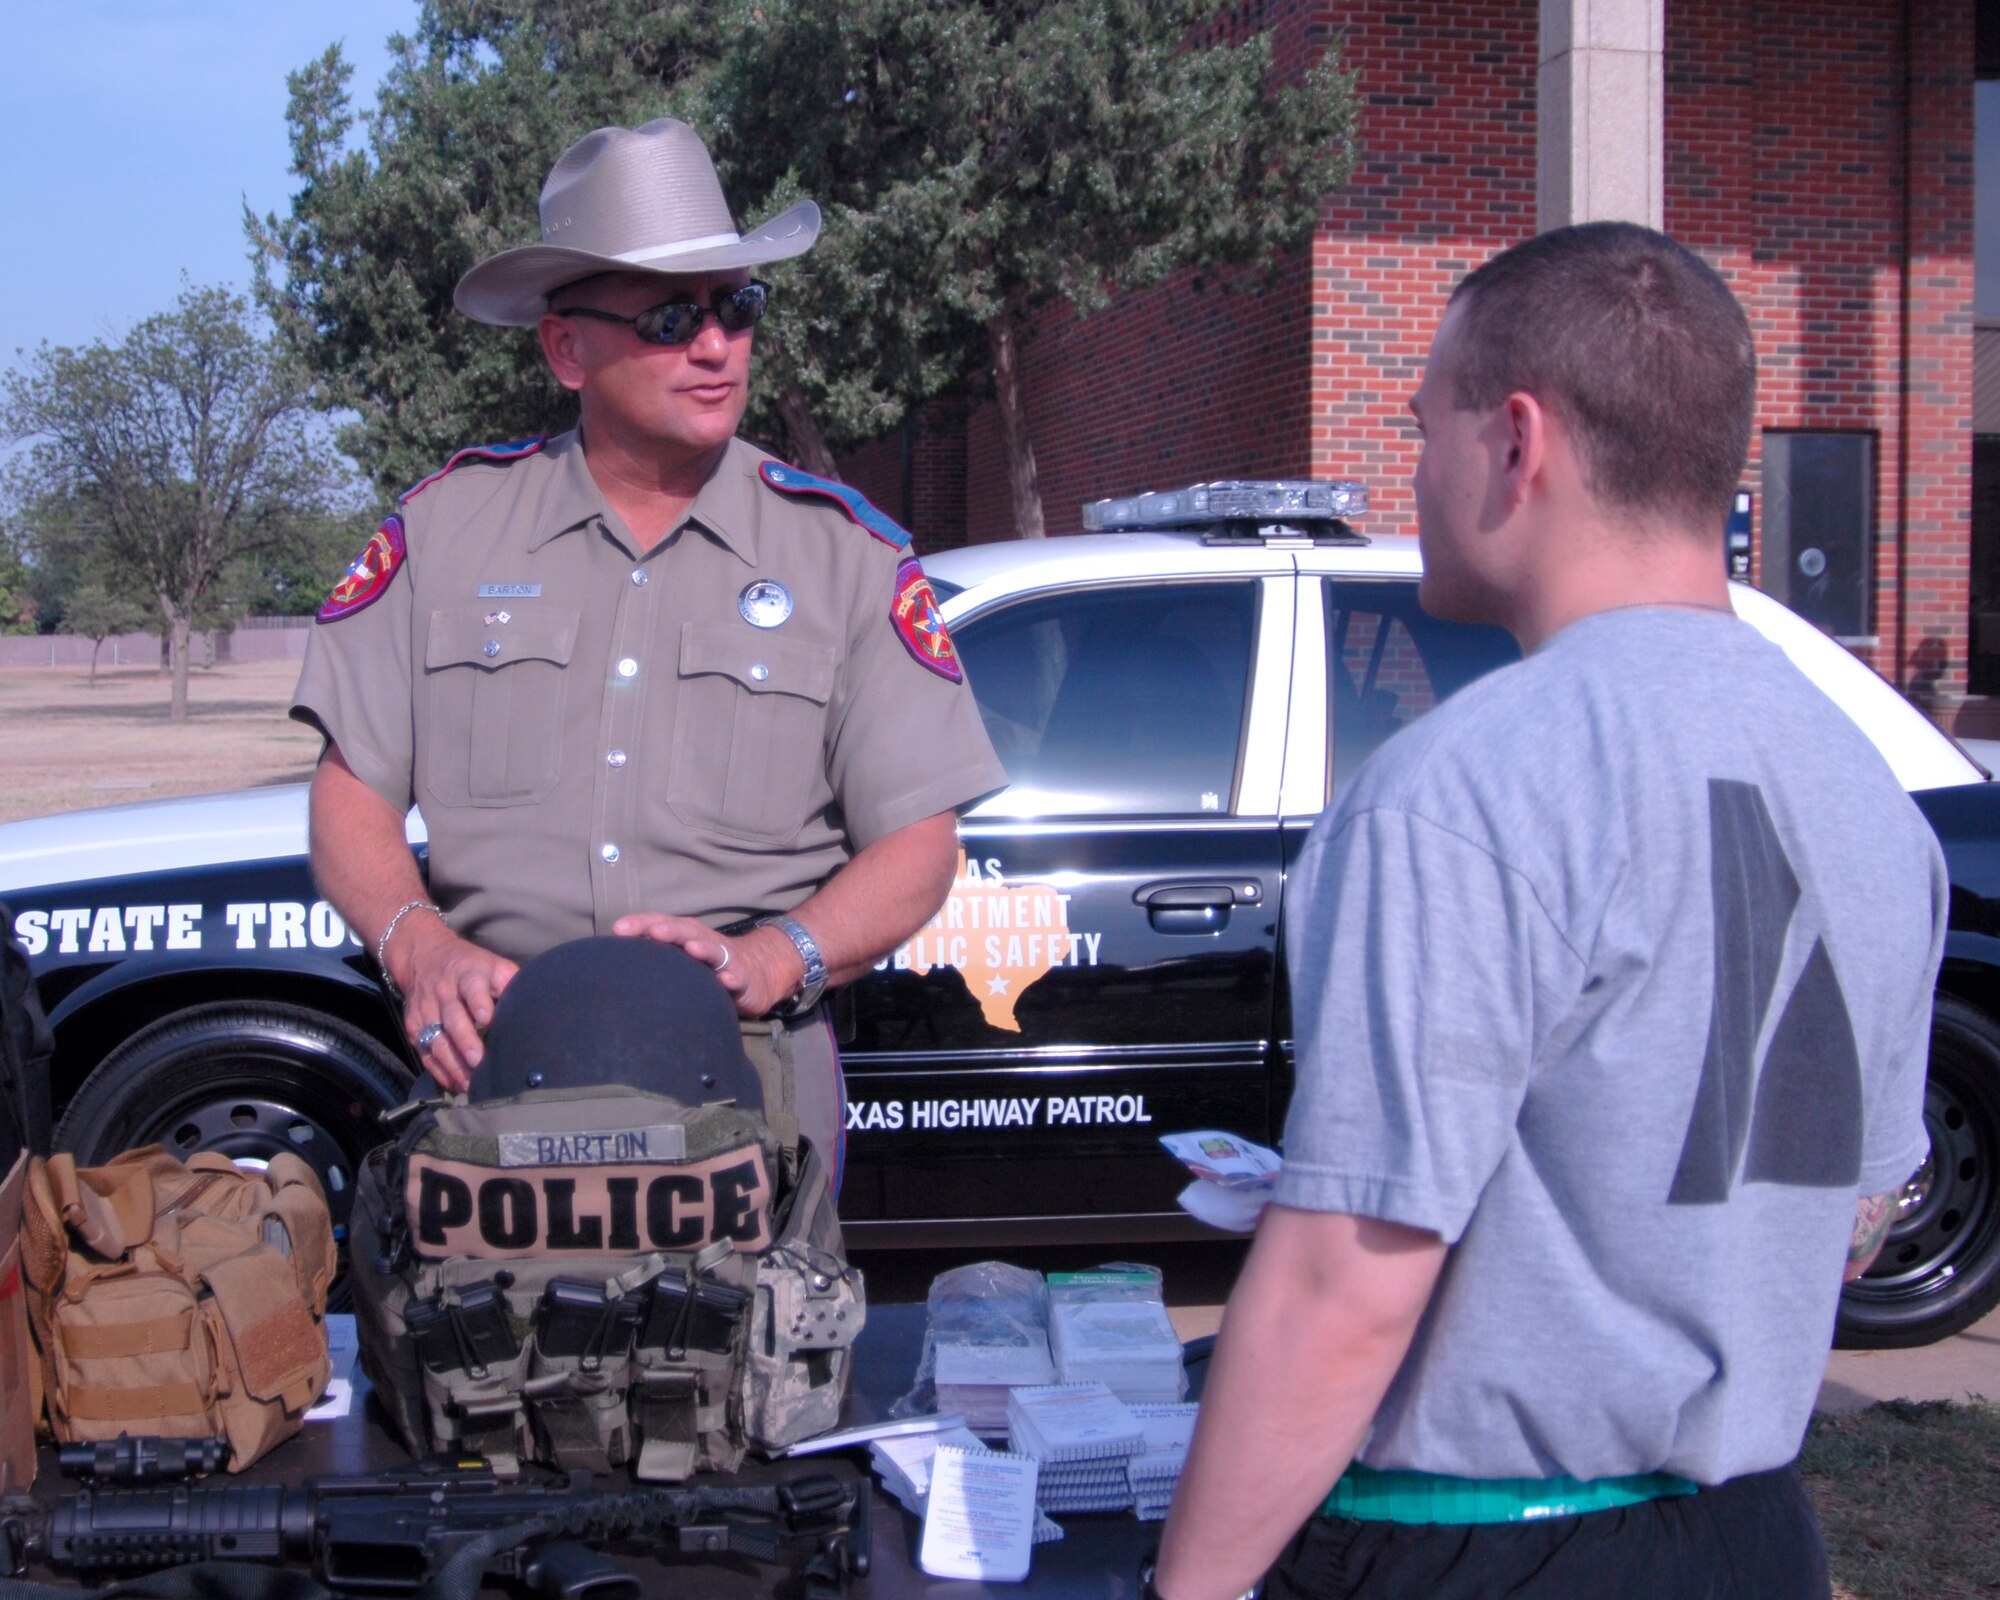 GOODFELLOW AIR FORCE BASE, Texas - Senior Trooper John Barton (left) from the Texas Highway Patrol speaks to Spc. Robert Murtha, a student with the 344th Military Intelligence Battalion, about road awareness during Safety Day activities at May 27. The THP works to maintain safety on the roads through the use of education and awareness programs. (U.S. Air Force photo/Tech. Sgt. Jon DuMond)

